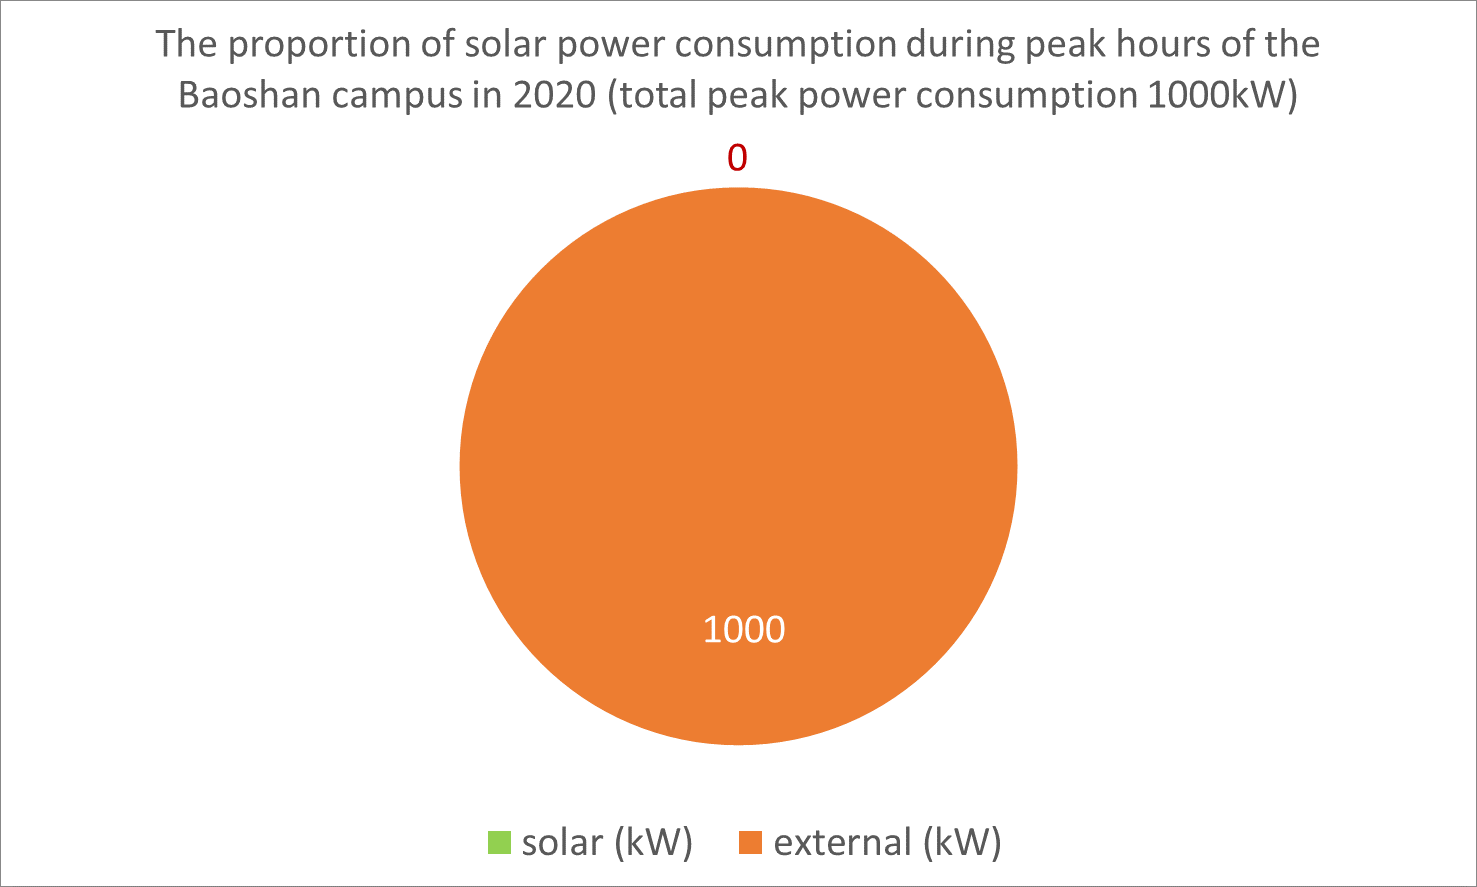 Figure 5. The proportion of solar power consumption during peak hours of the Baoshan campus in 2020